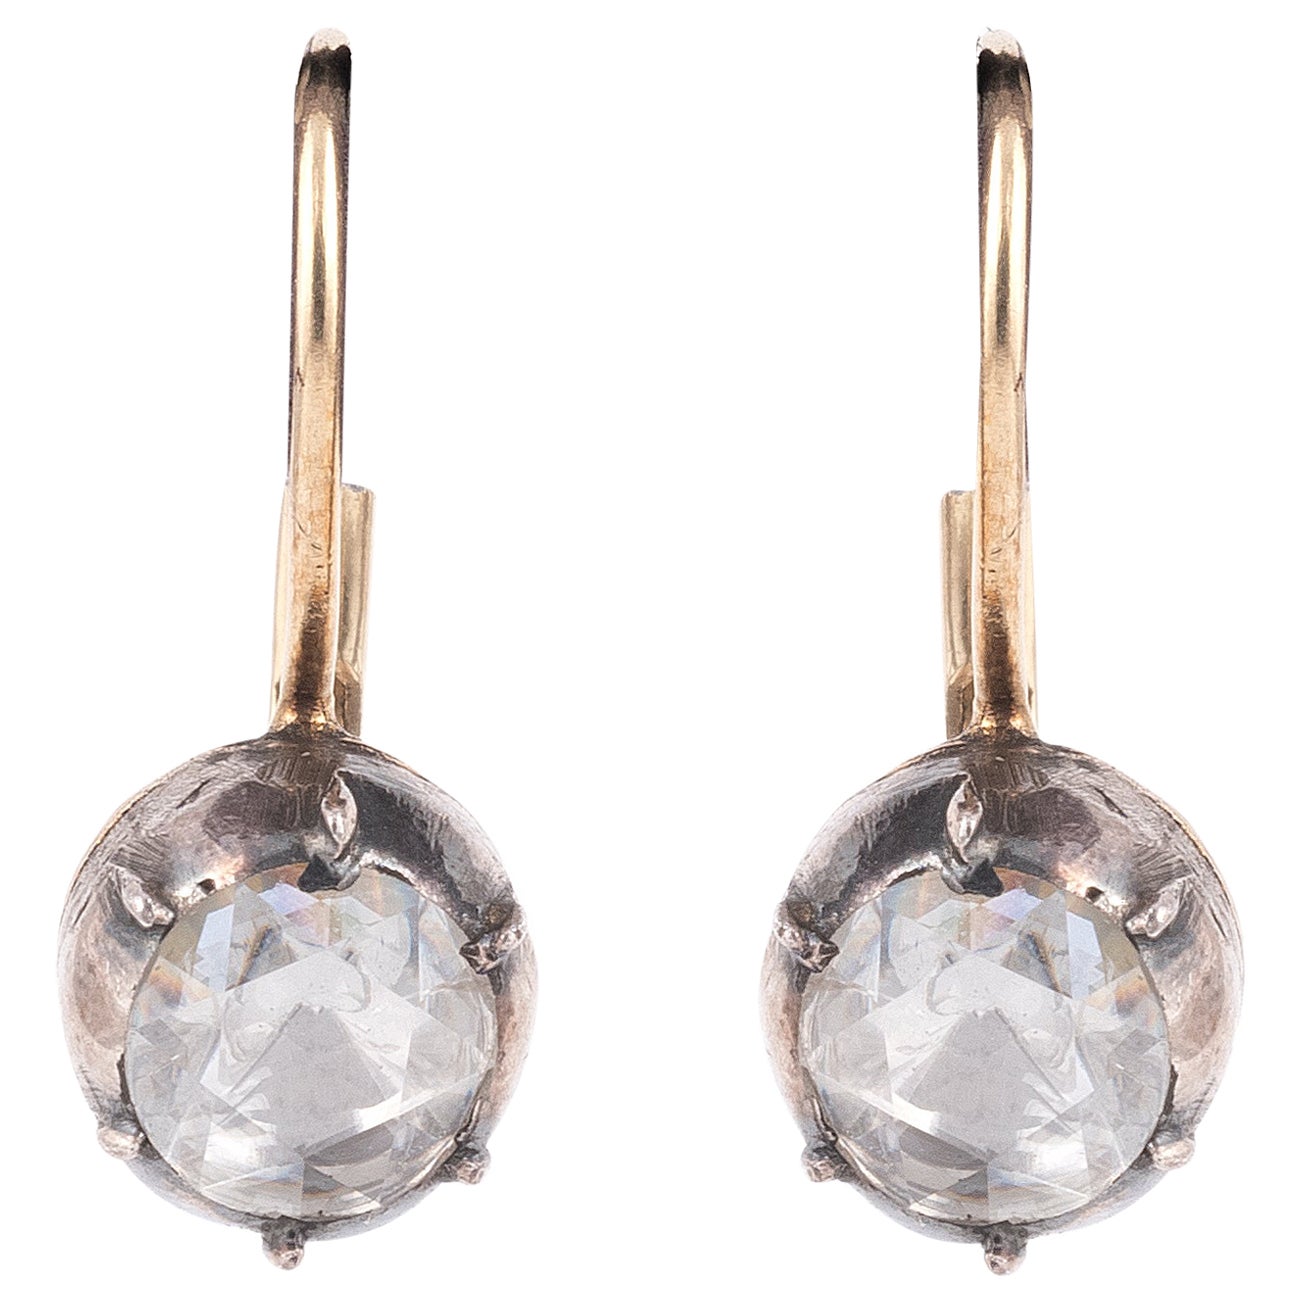 Silver and 18kt yellow gold with collet set foiled back rose-cut diamonds pair of earrings.
Gross weight : 3,21 gr. (pierced ears system)
Diamond diameter : 5,20 (0,50carat each approx.). 
